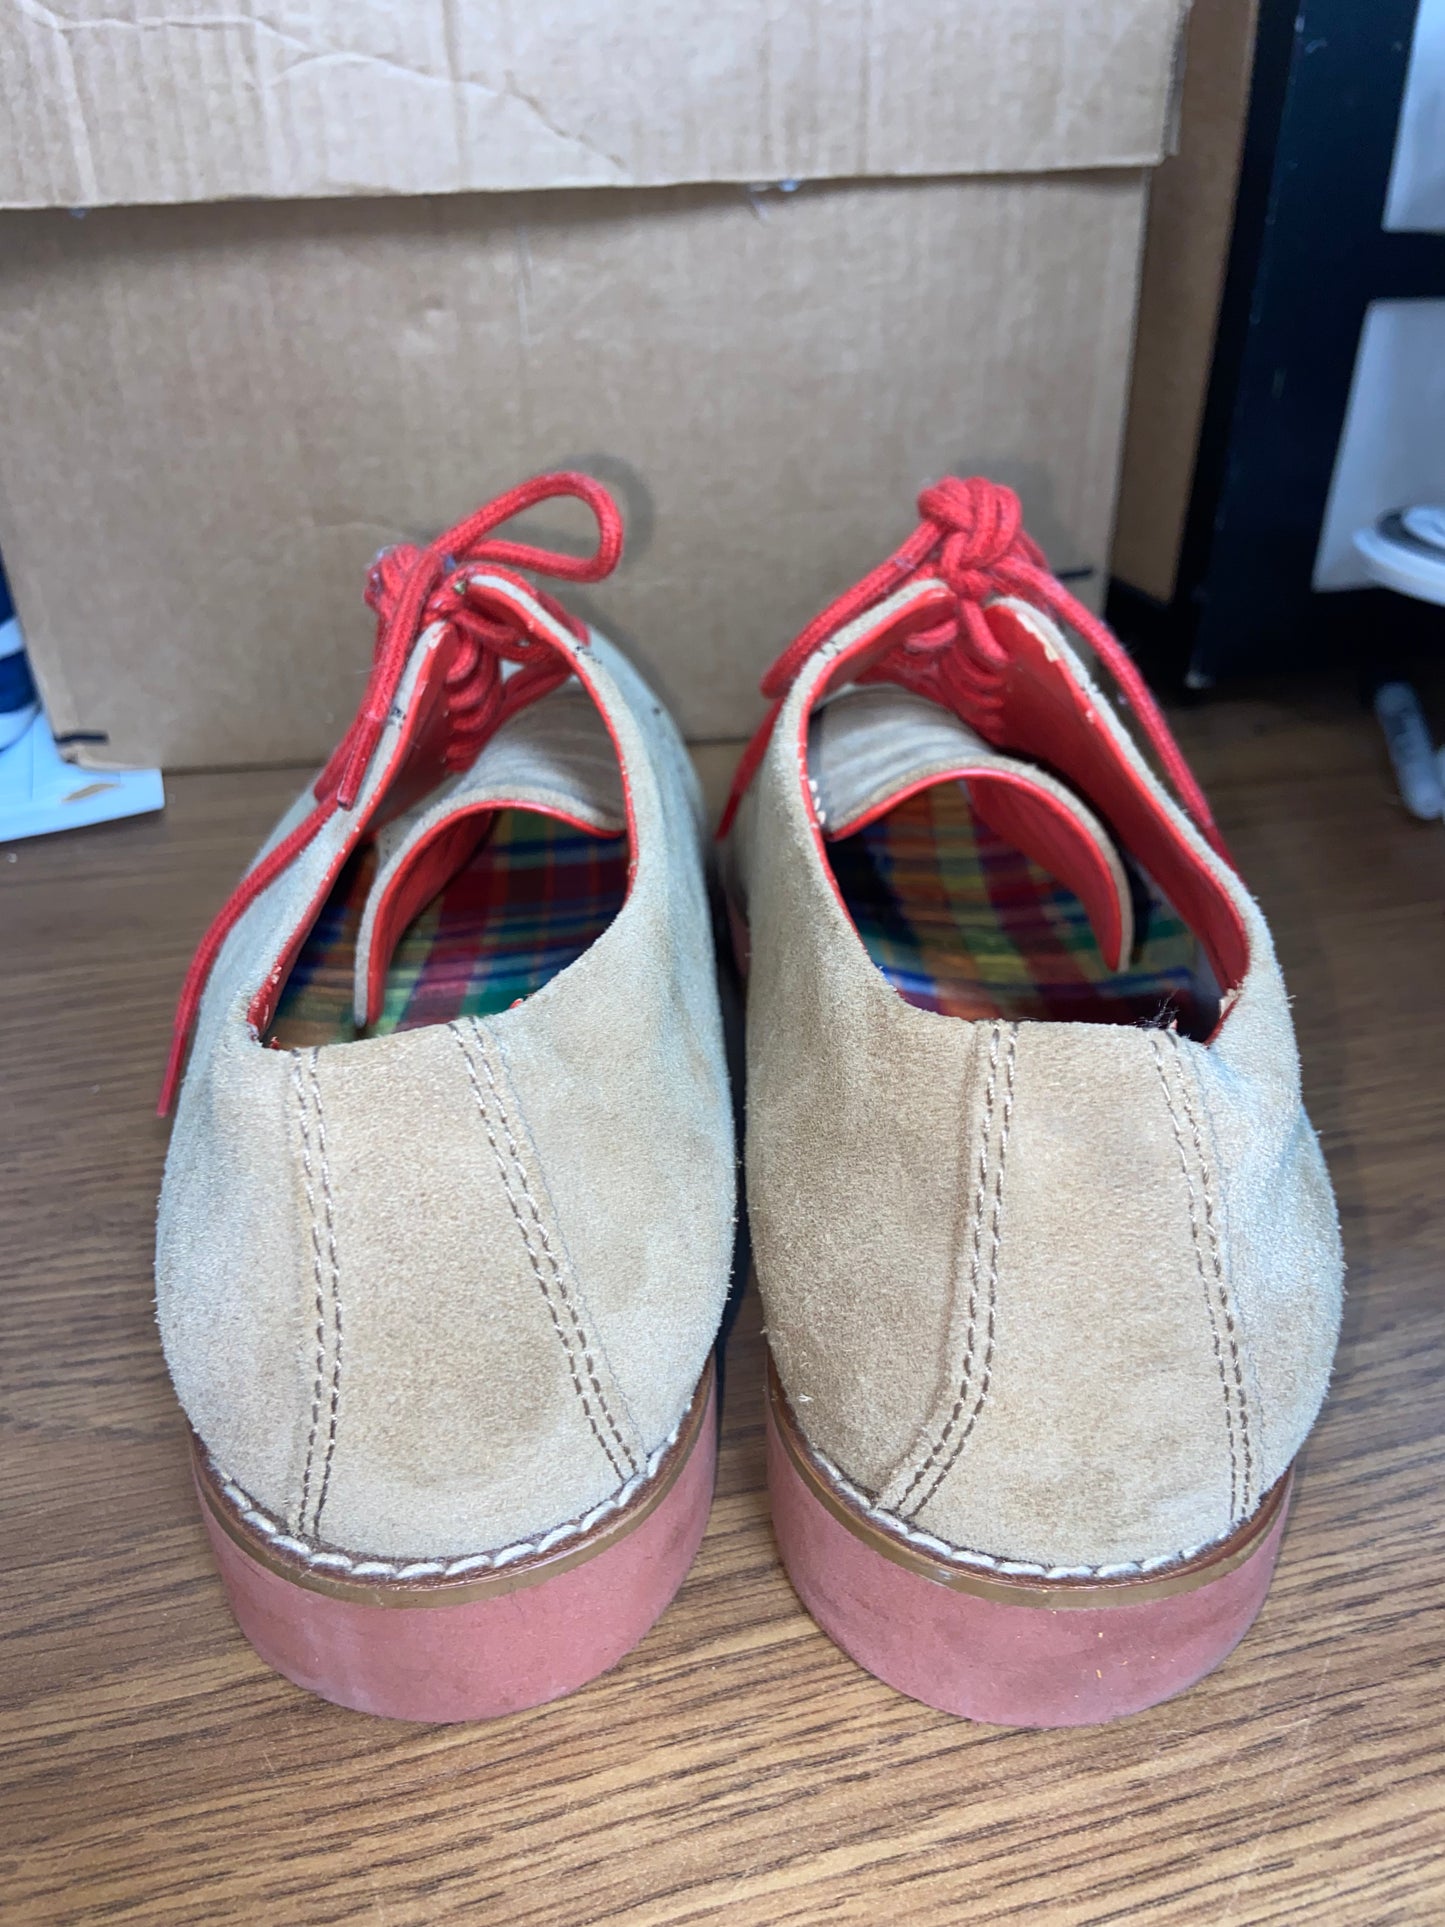 Buks By Walk Over Red Laced Declan Oxfords (Size 10.5)